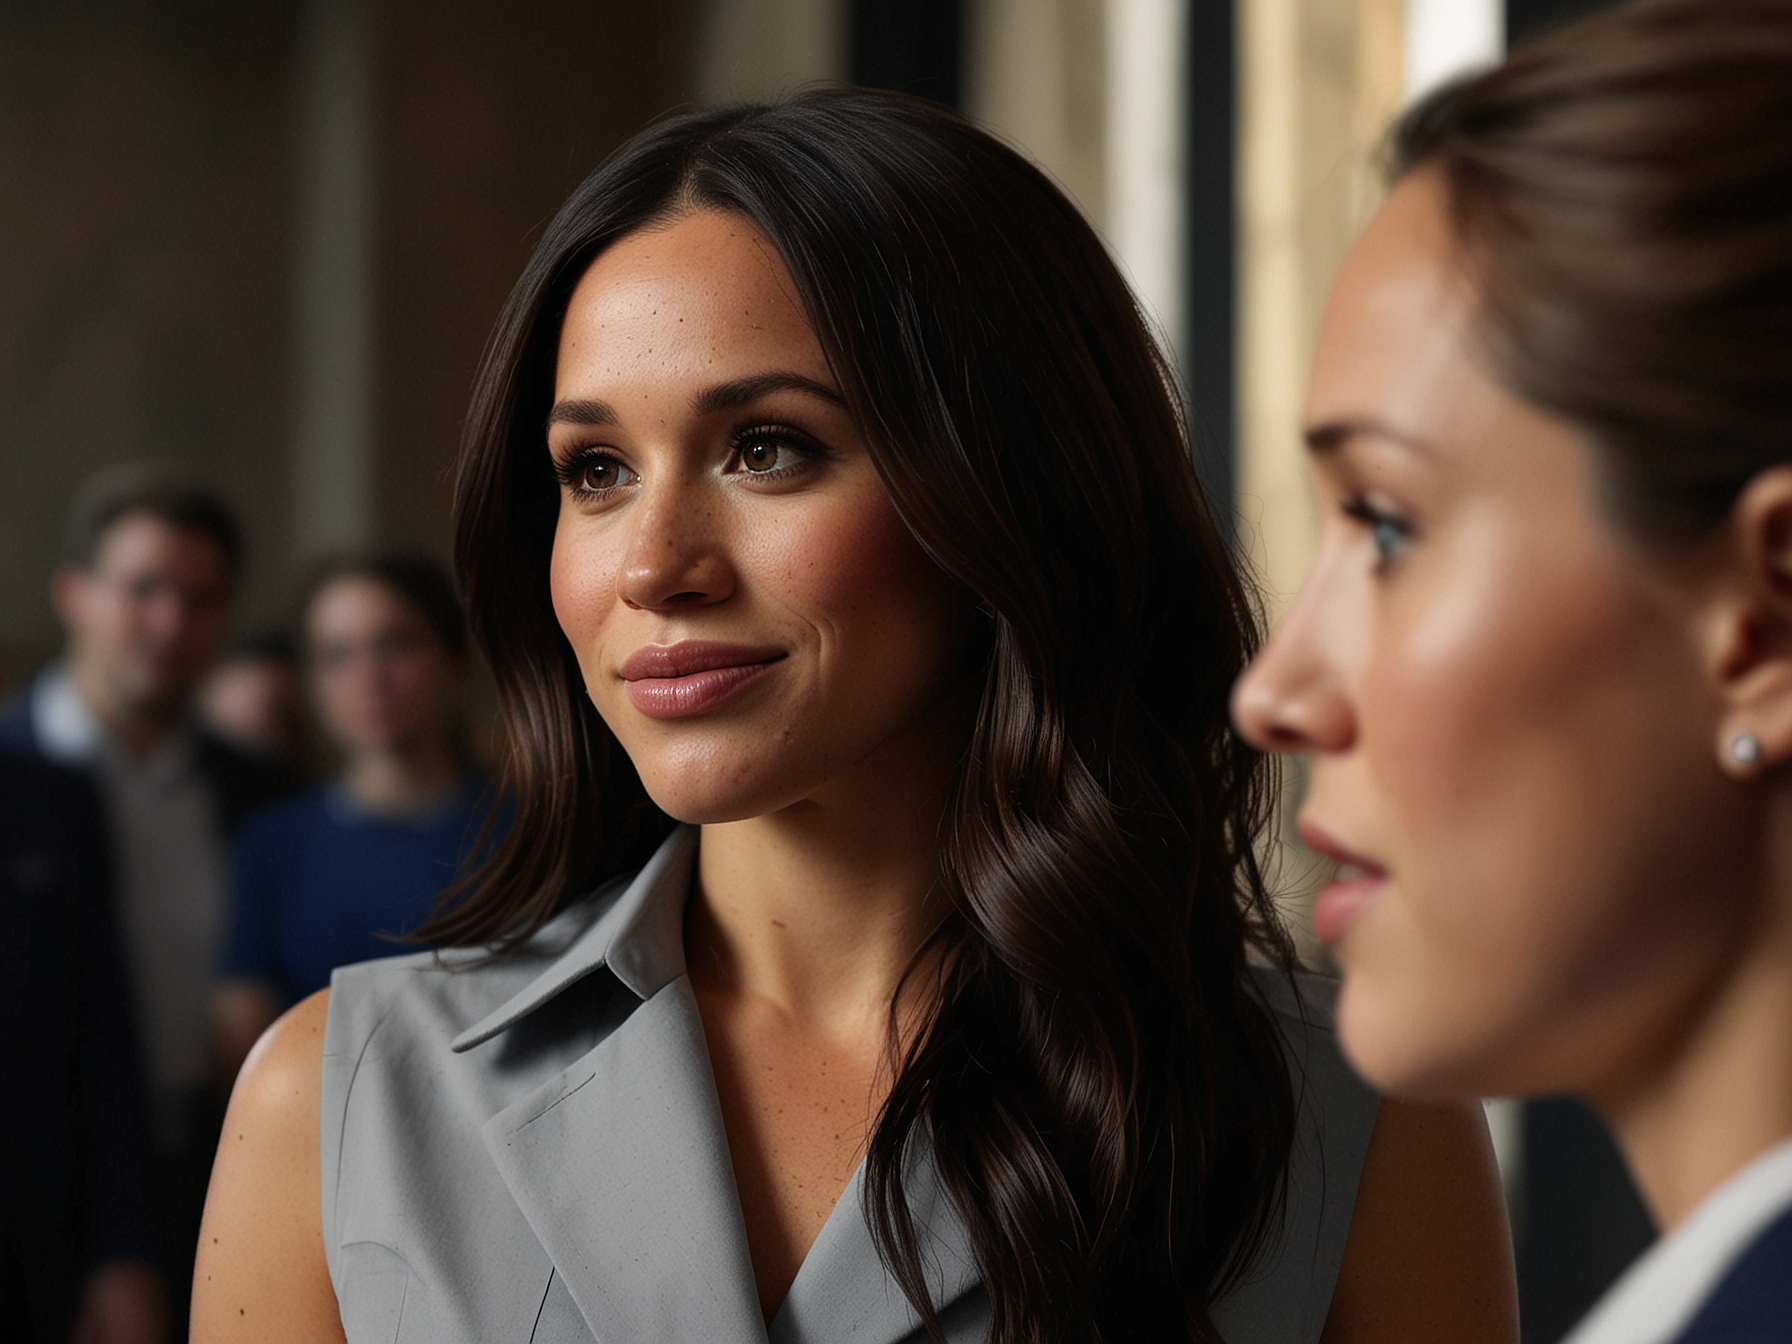 A contrasting image of Meghan Markle in a public interview, highlighting her frequent public criticisms and the focus on personal narrative, juxtaposed with Kate's composed and dutiful public return.